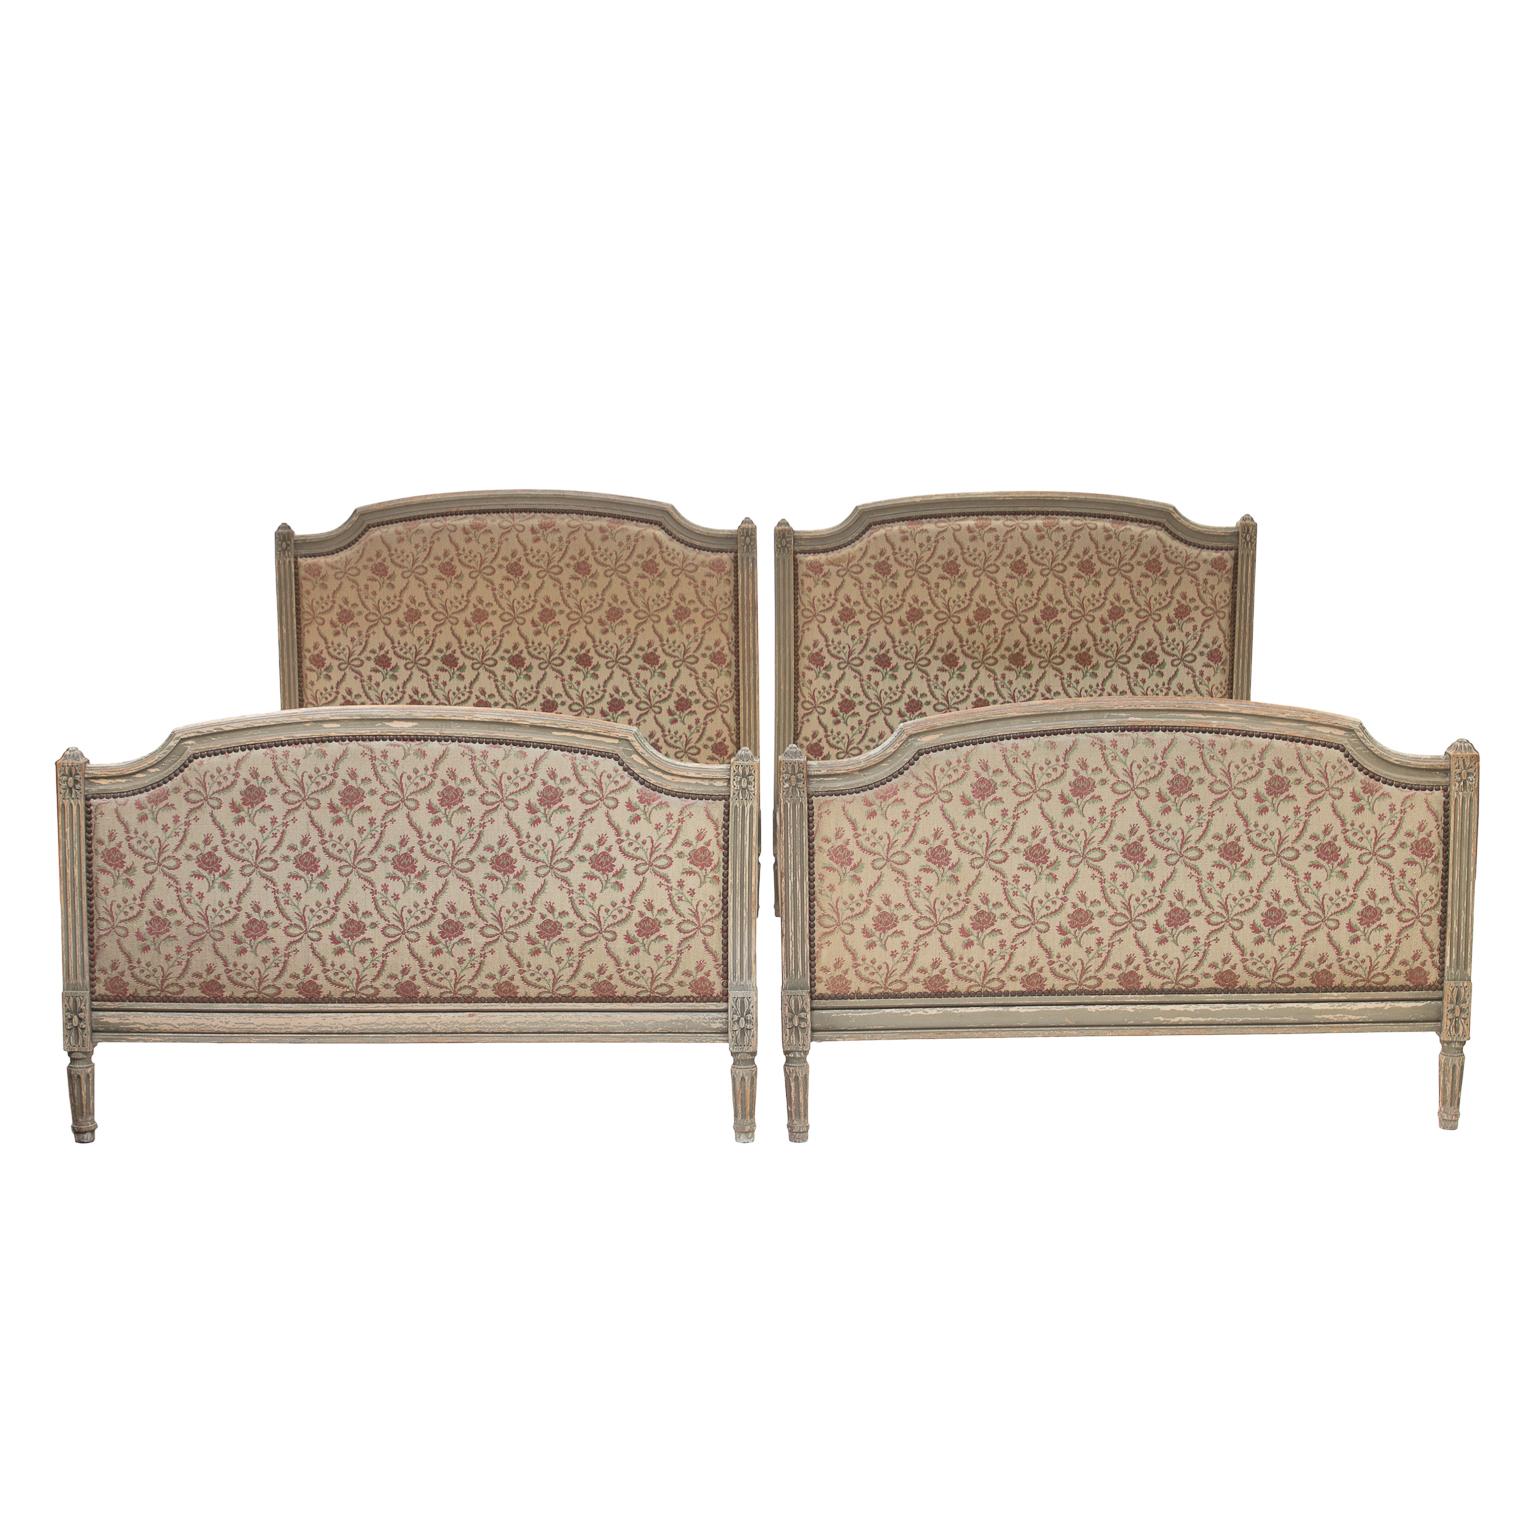 Pair of Louis XVI Style Painted Beds